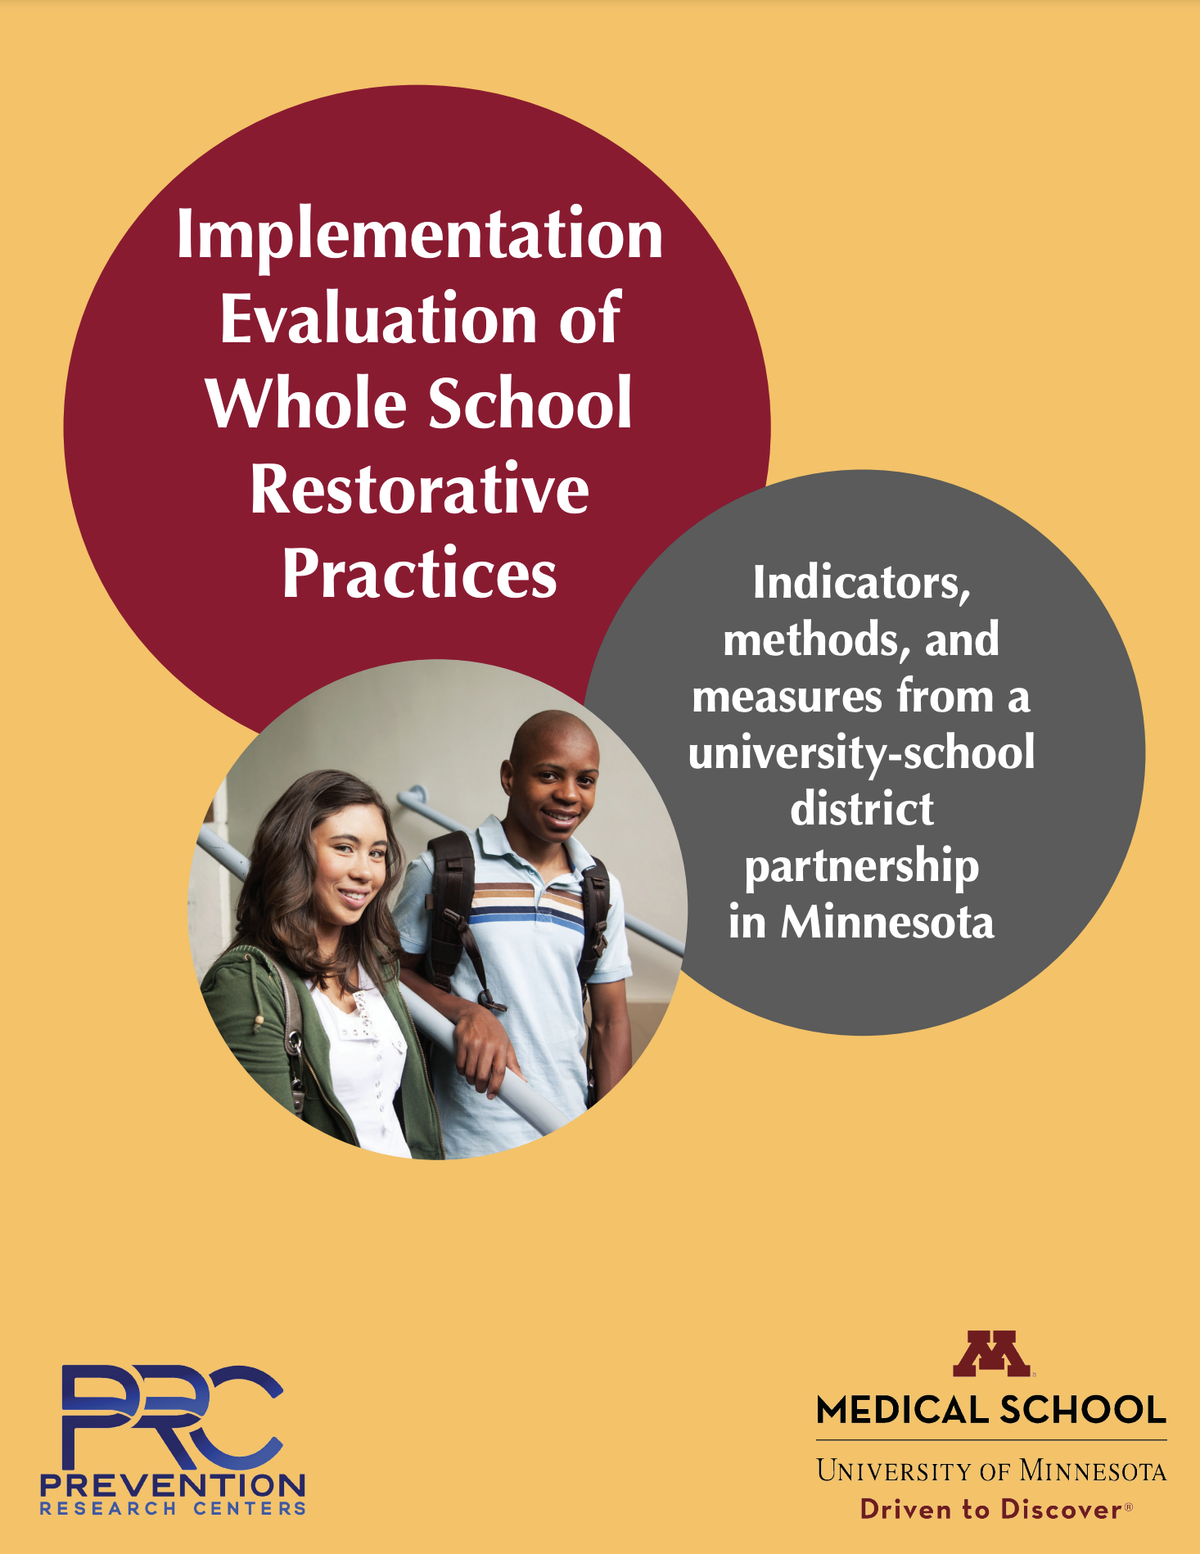 Cover of report with UMN branding and photo of two teens